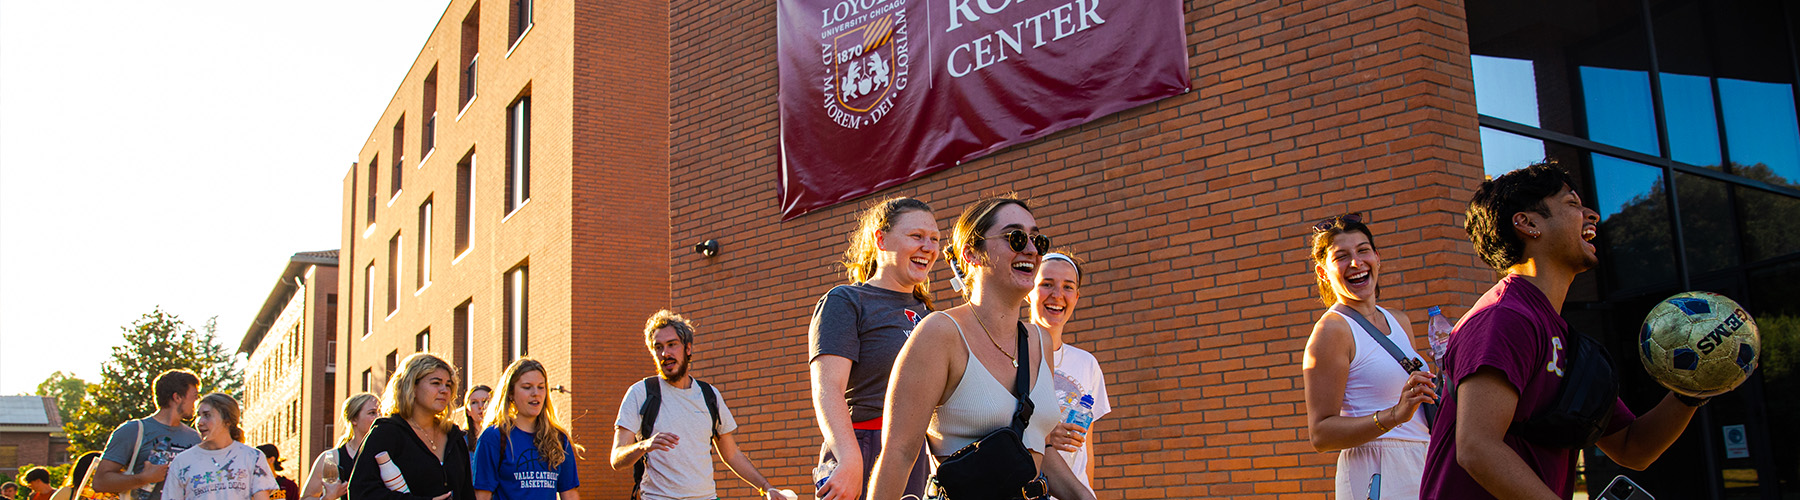 Students walk next to the Rome Center on campus